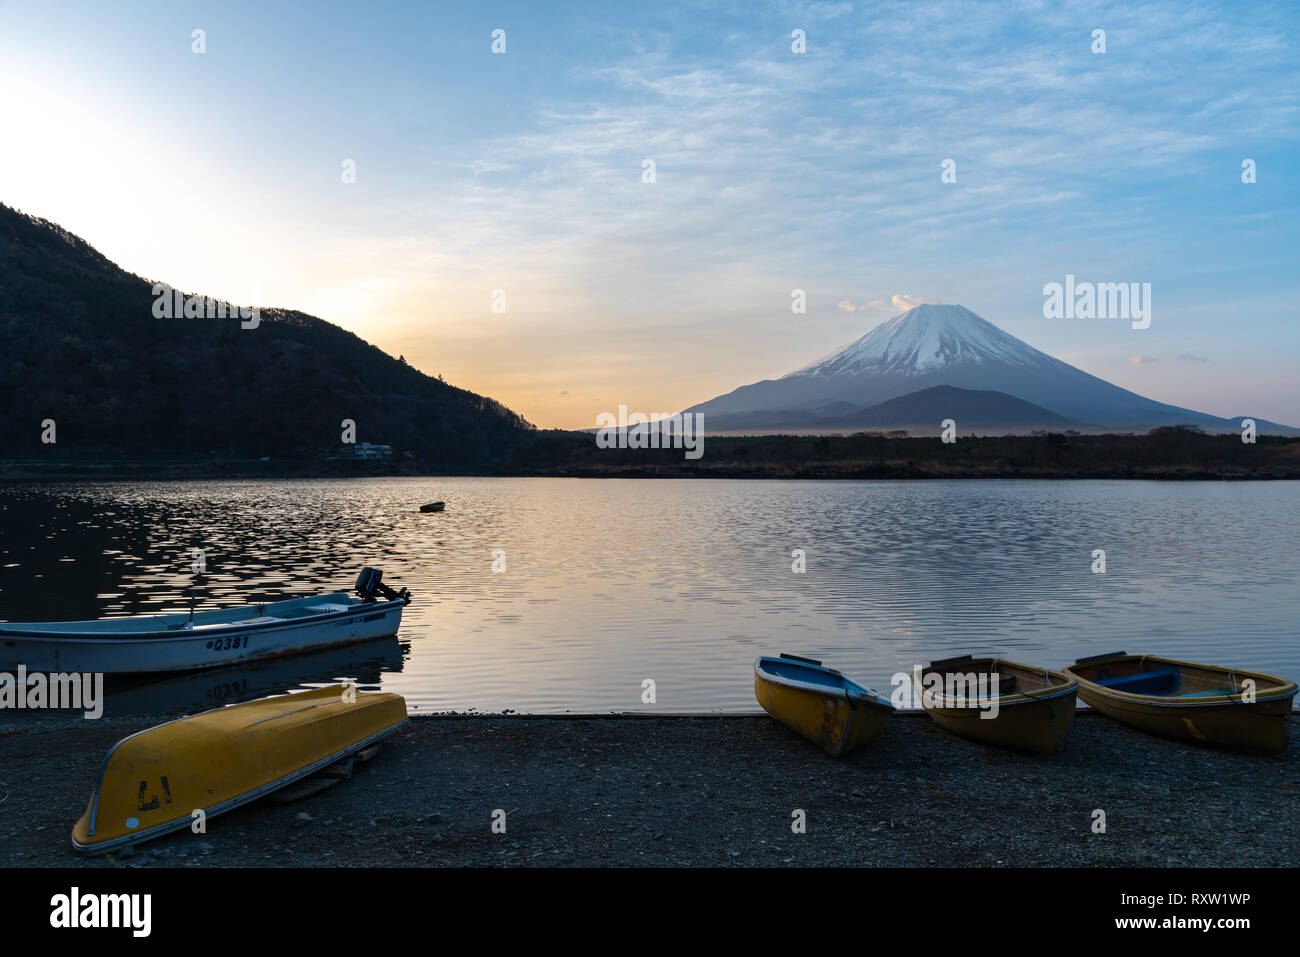 Mount Fuji ( Mt. Fuji ) in the morning day with reflection on sunrise time Stock Photo